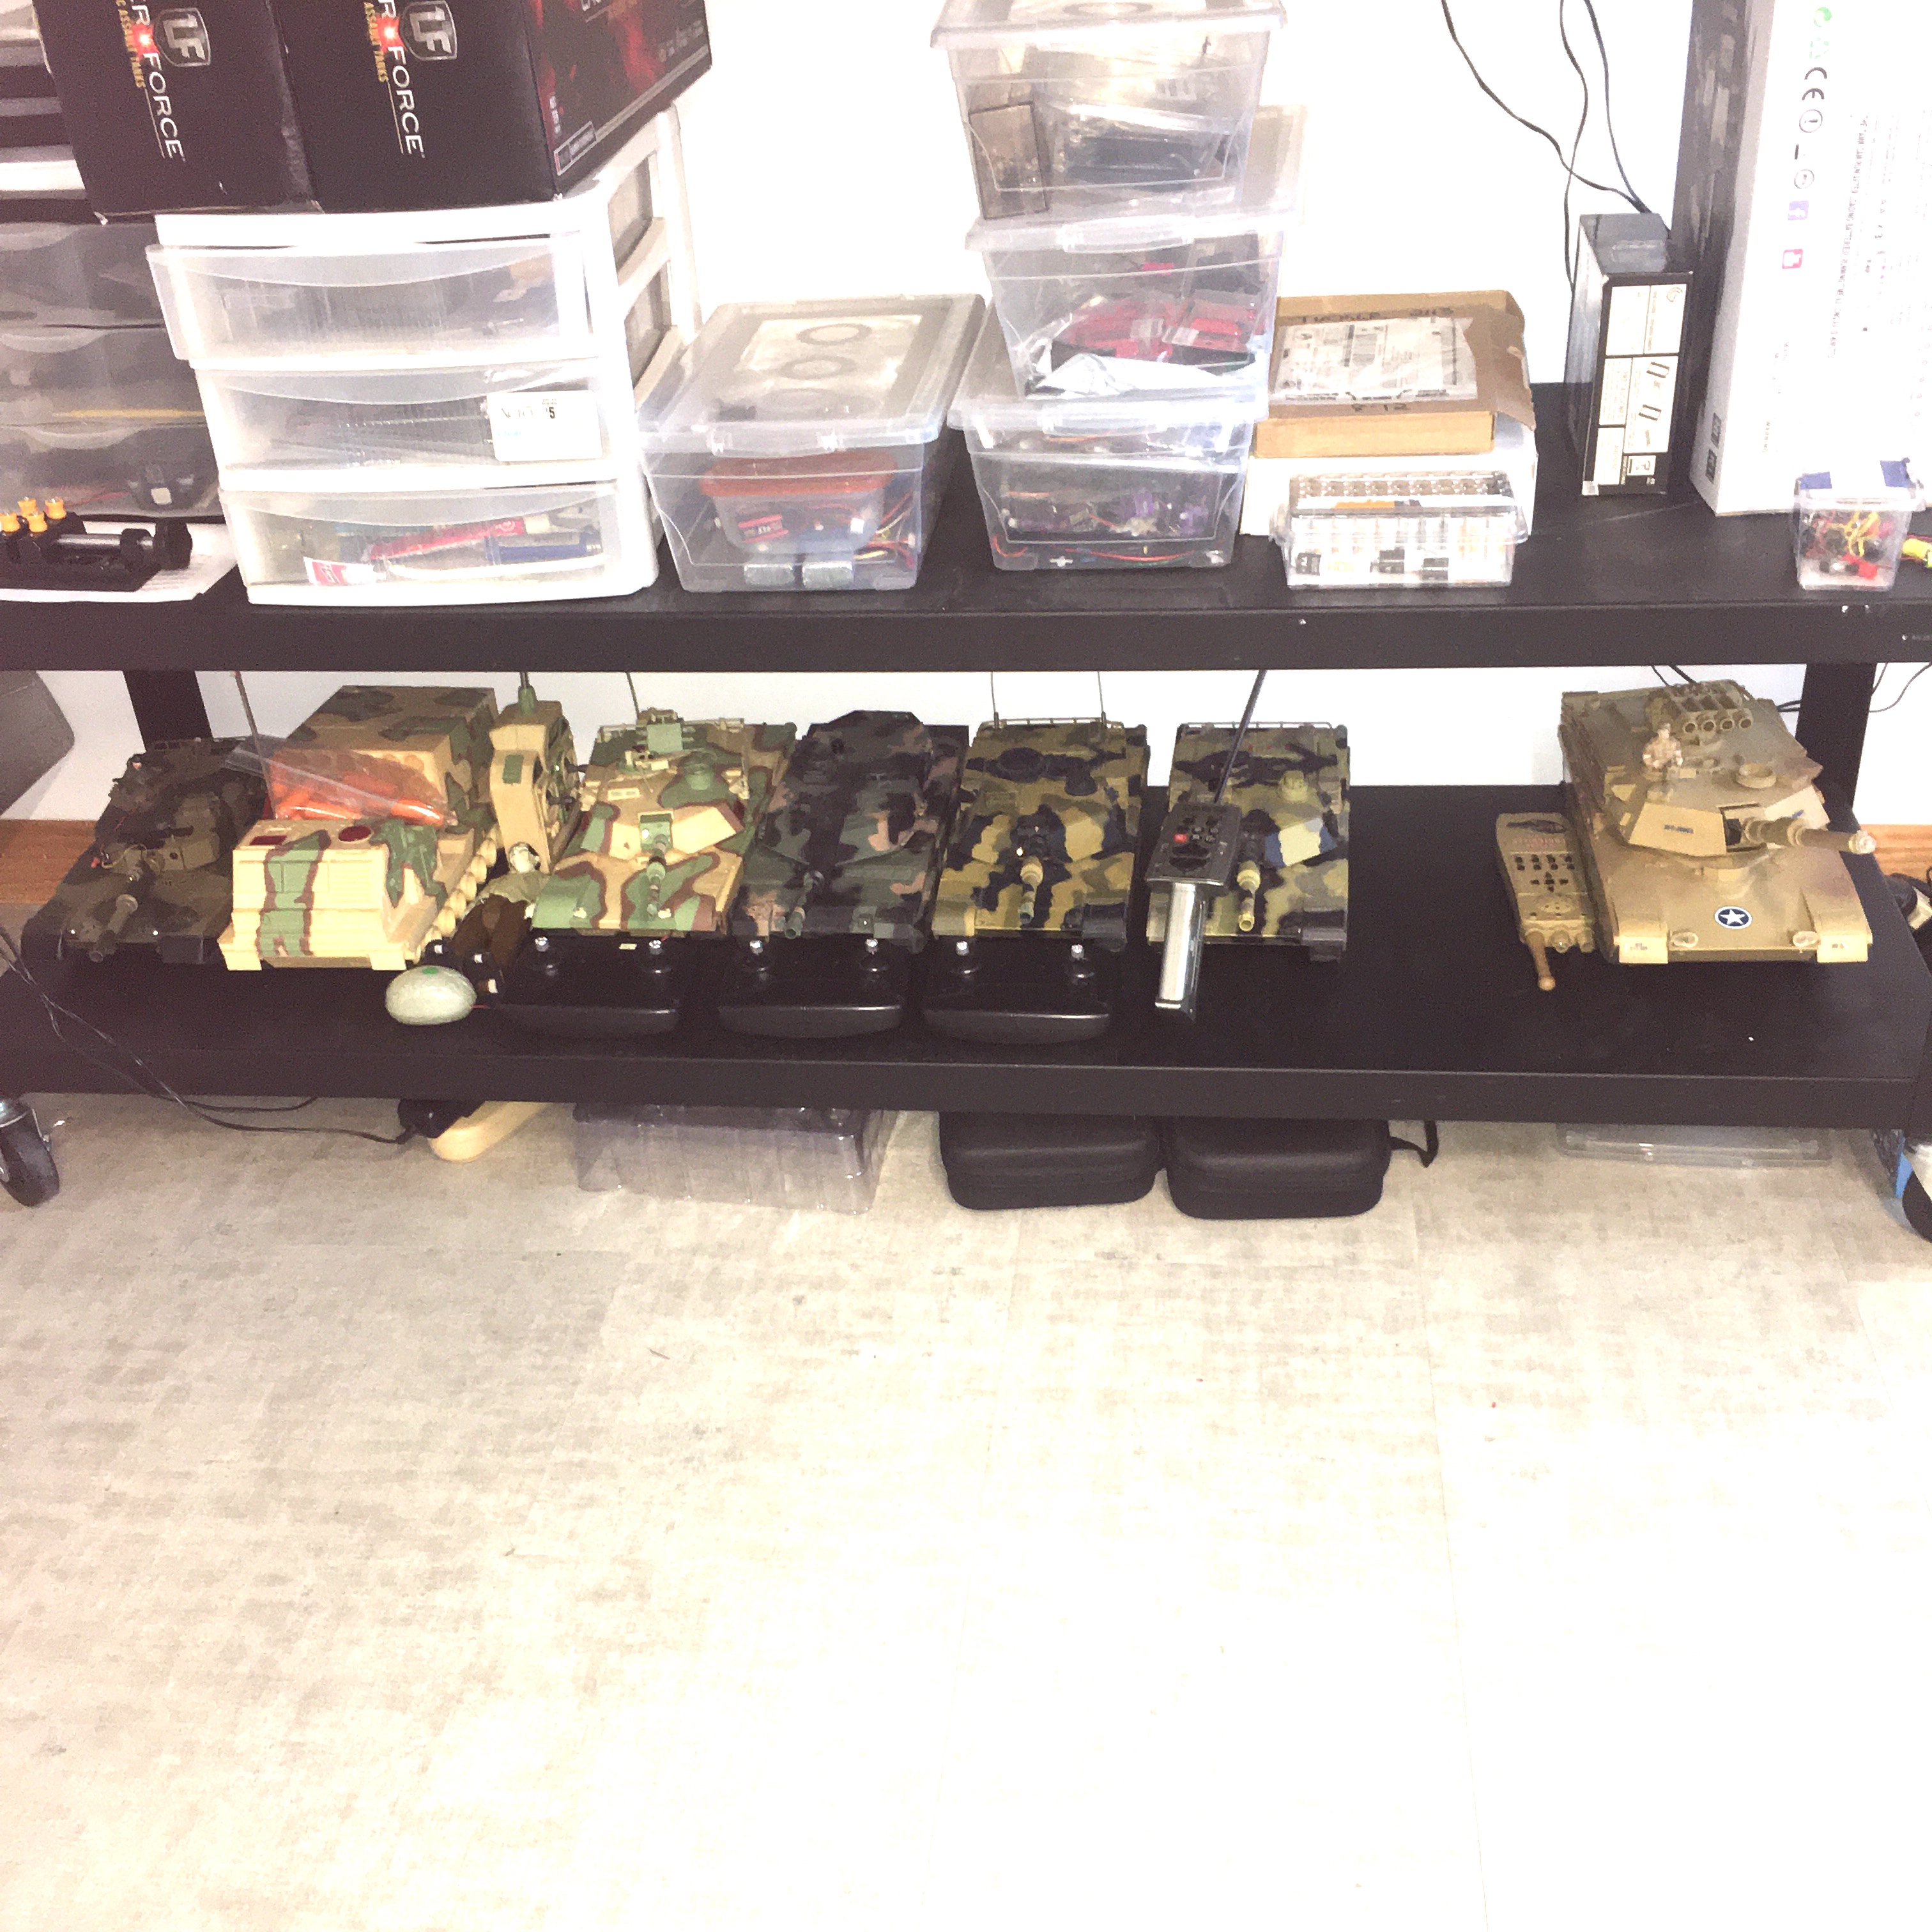 Here are my stash of 1/24 Tanks. There is a 1/16 at the far right.